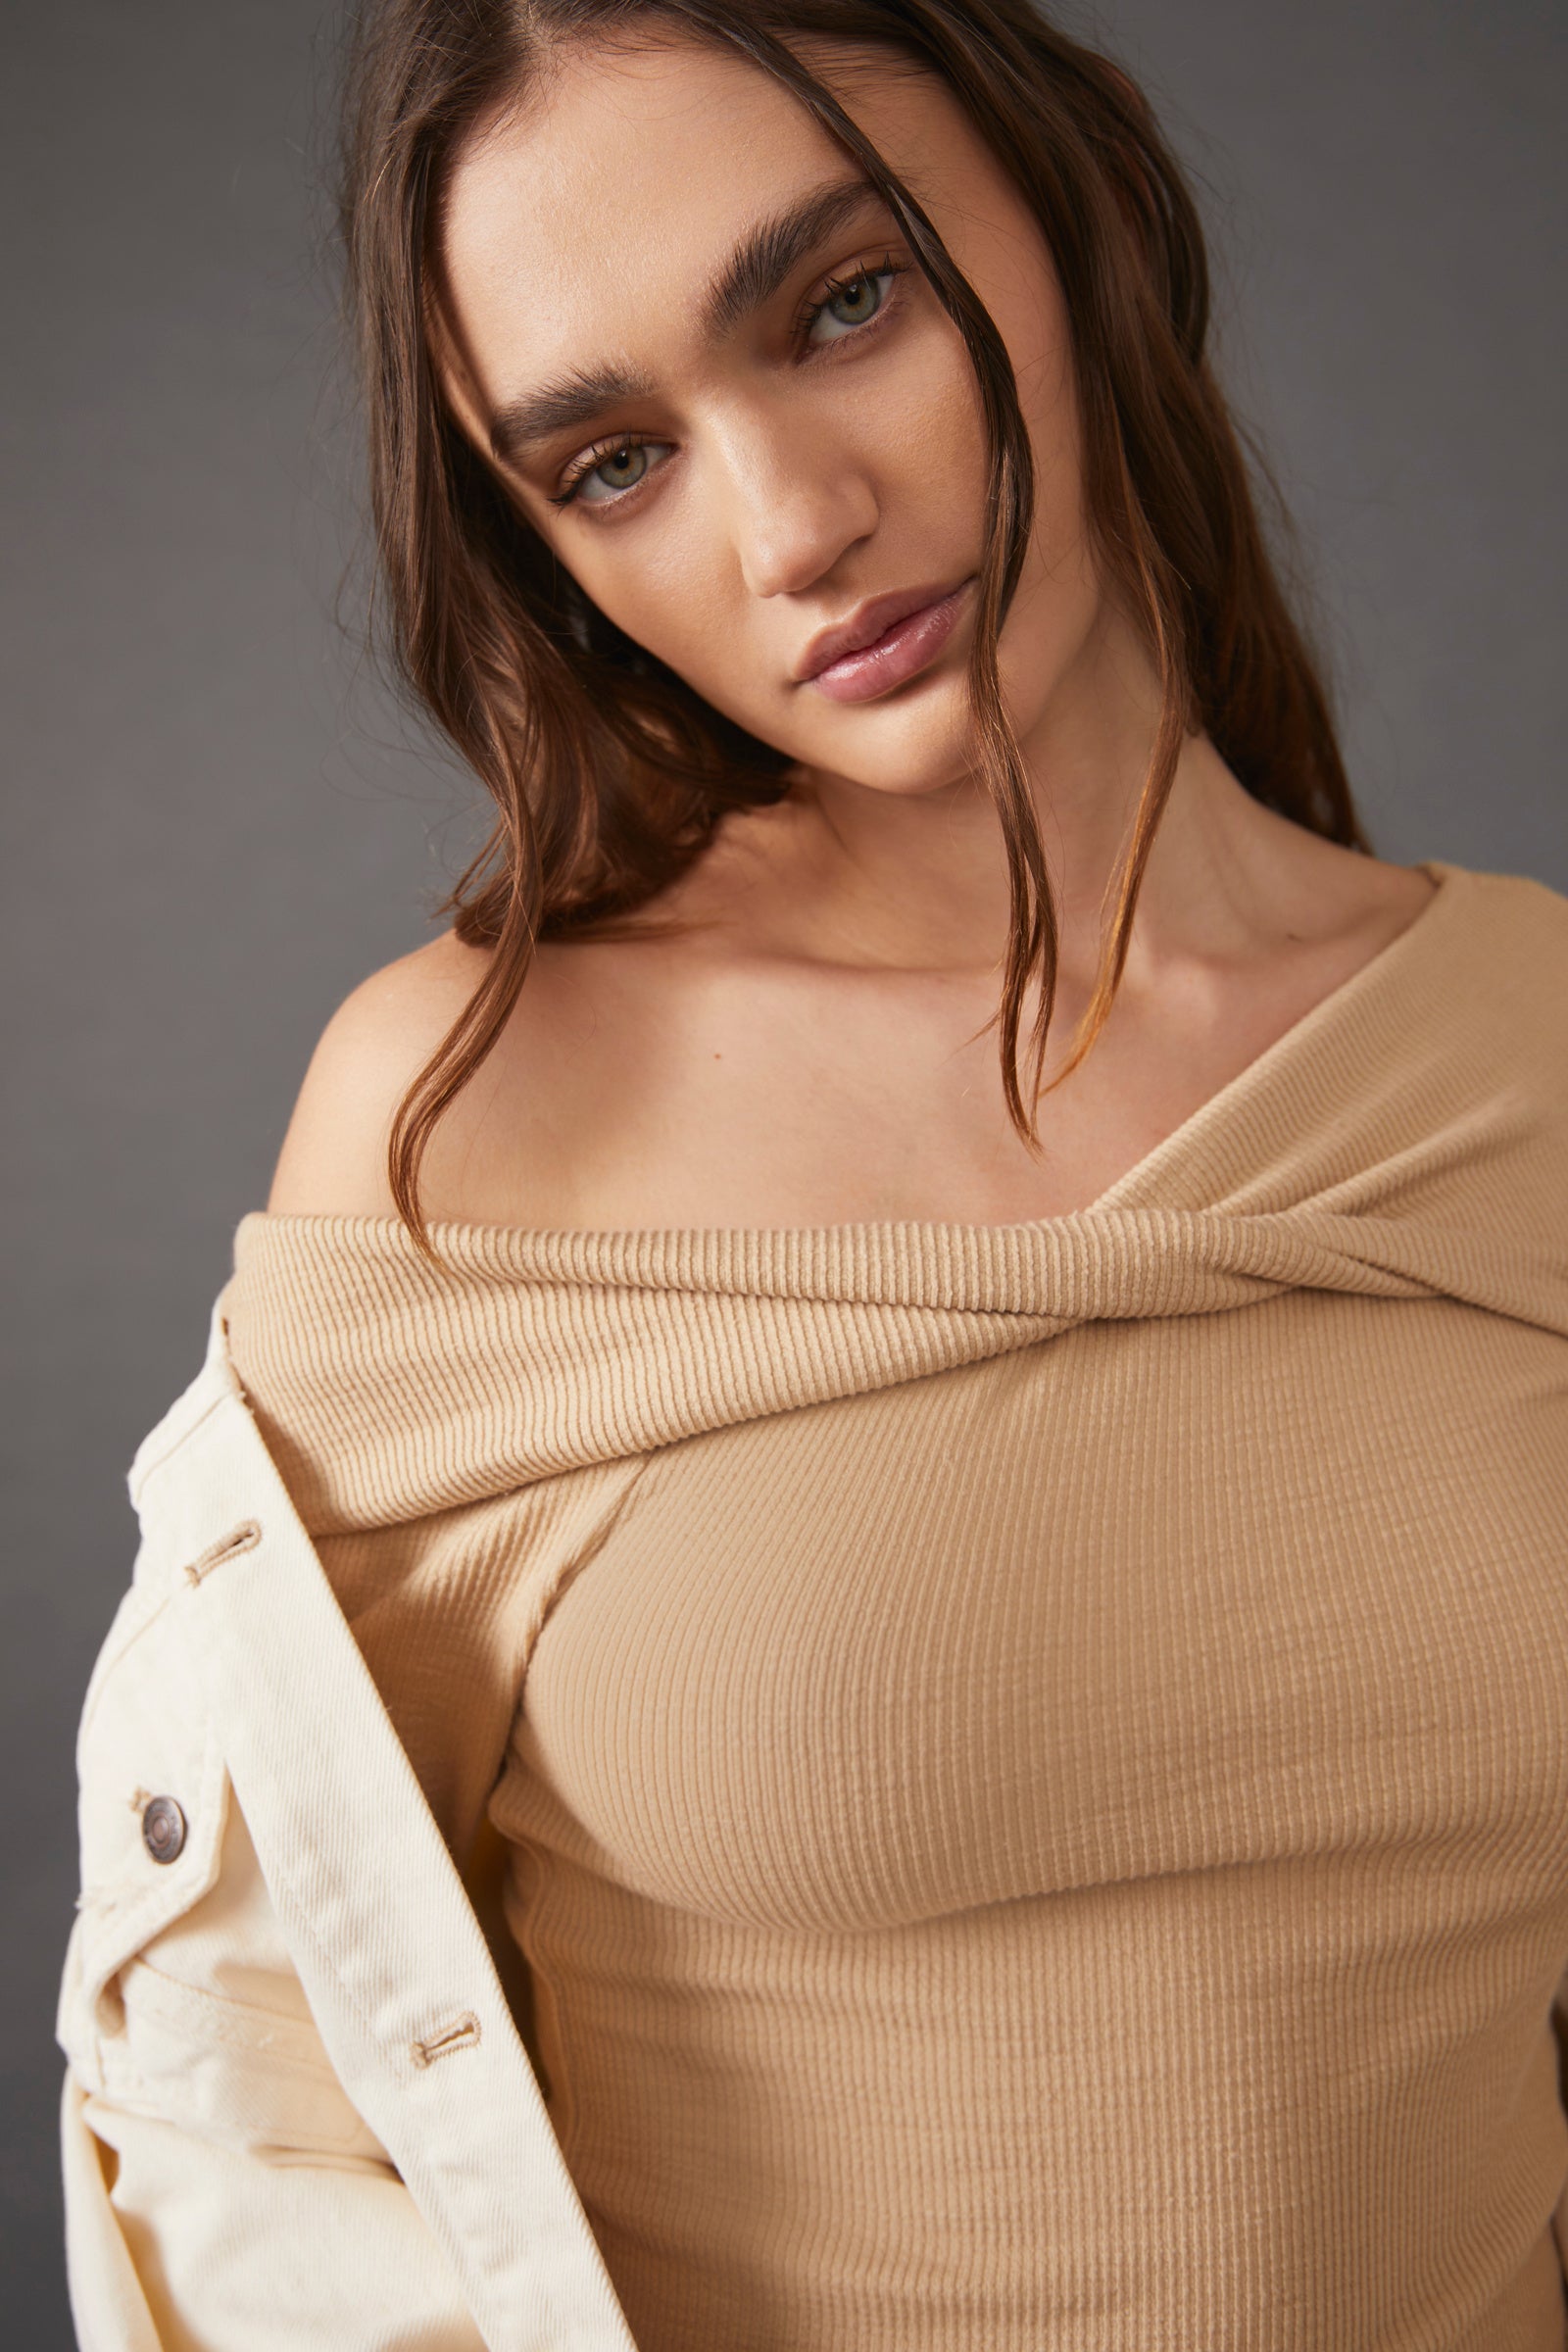 Addie Layering Top in Winter Wheat